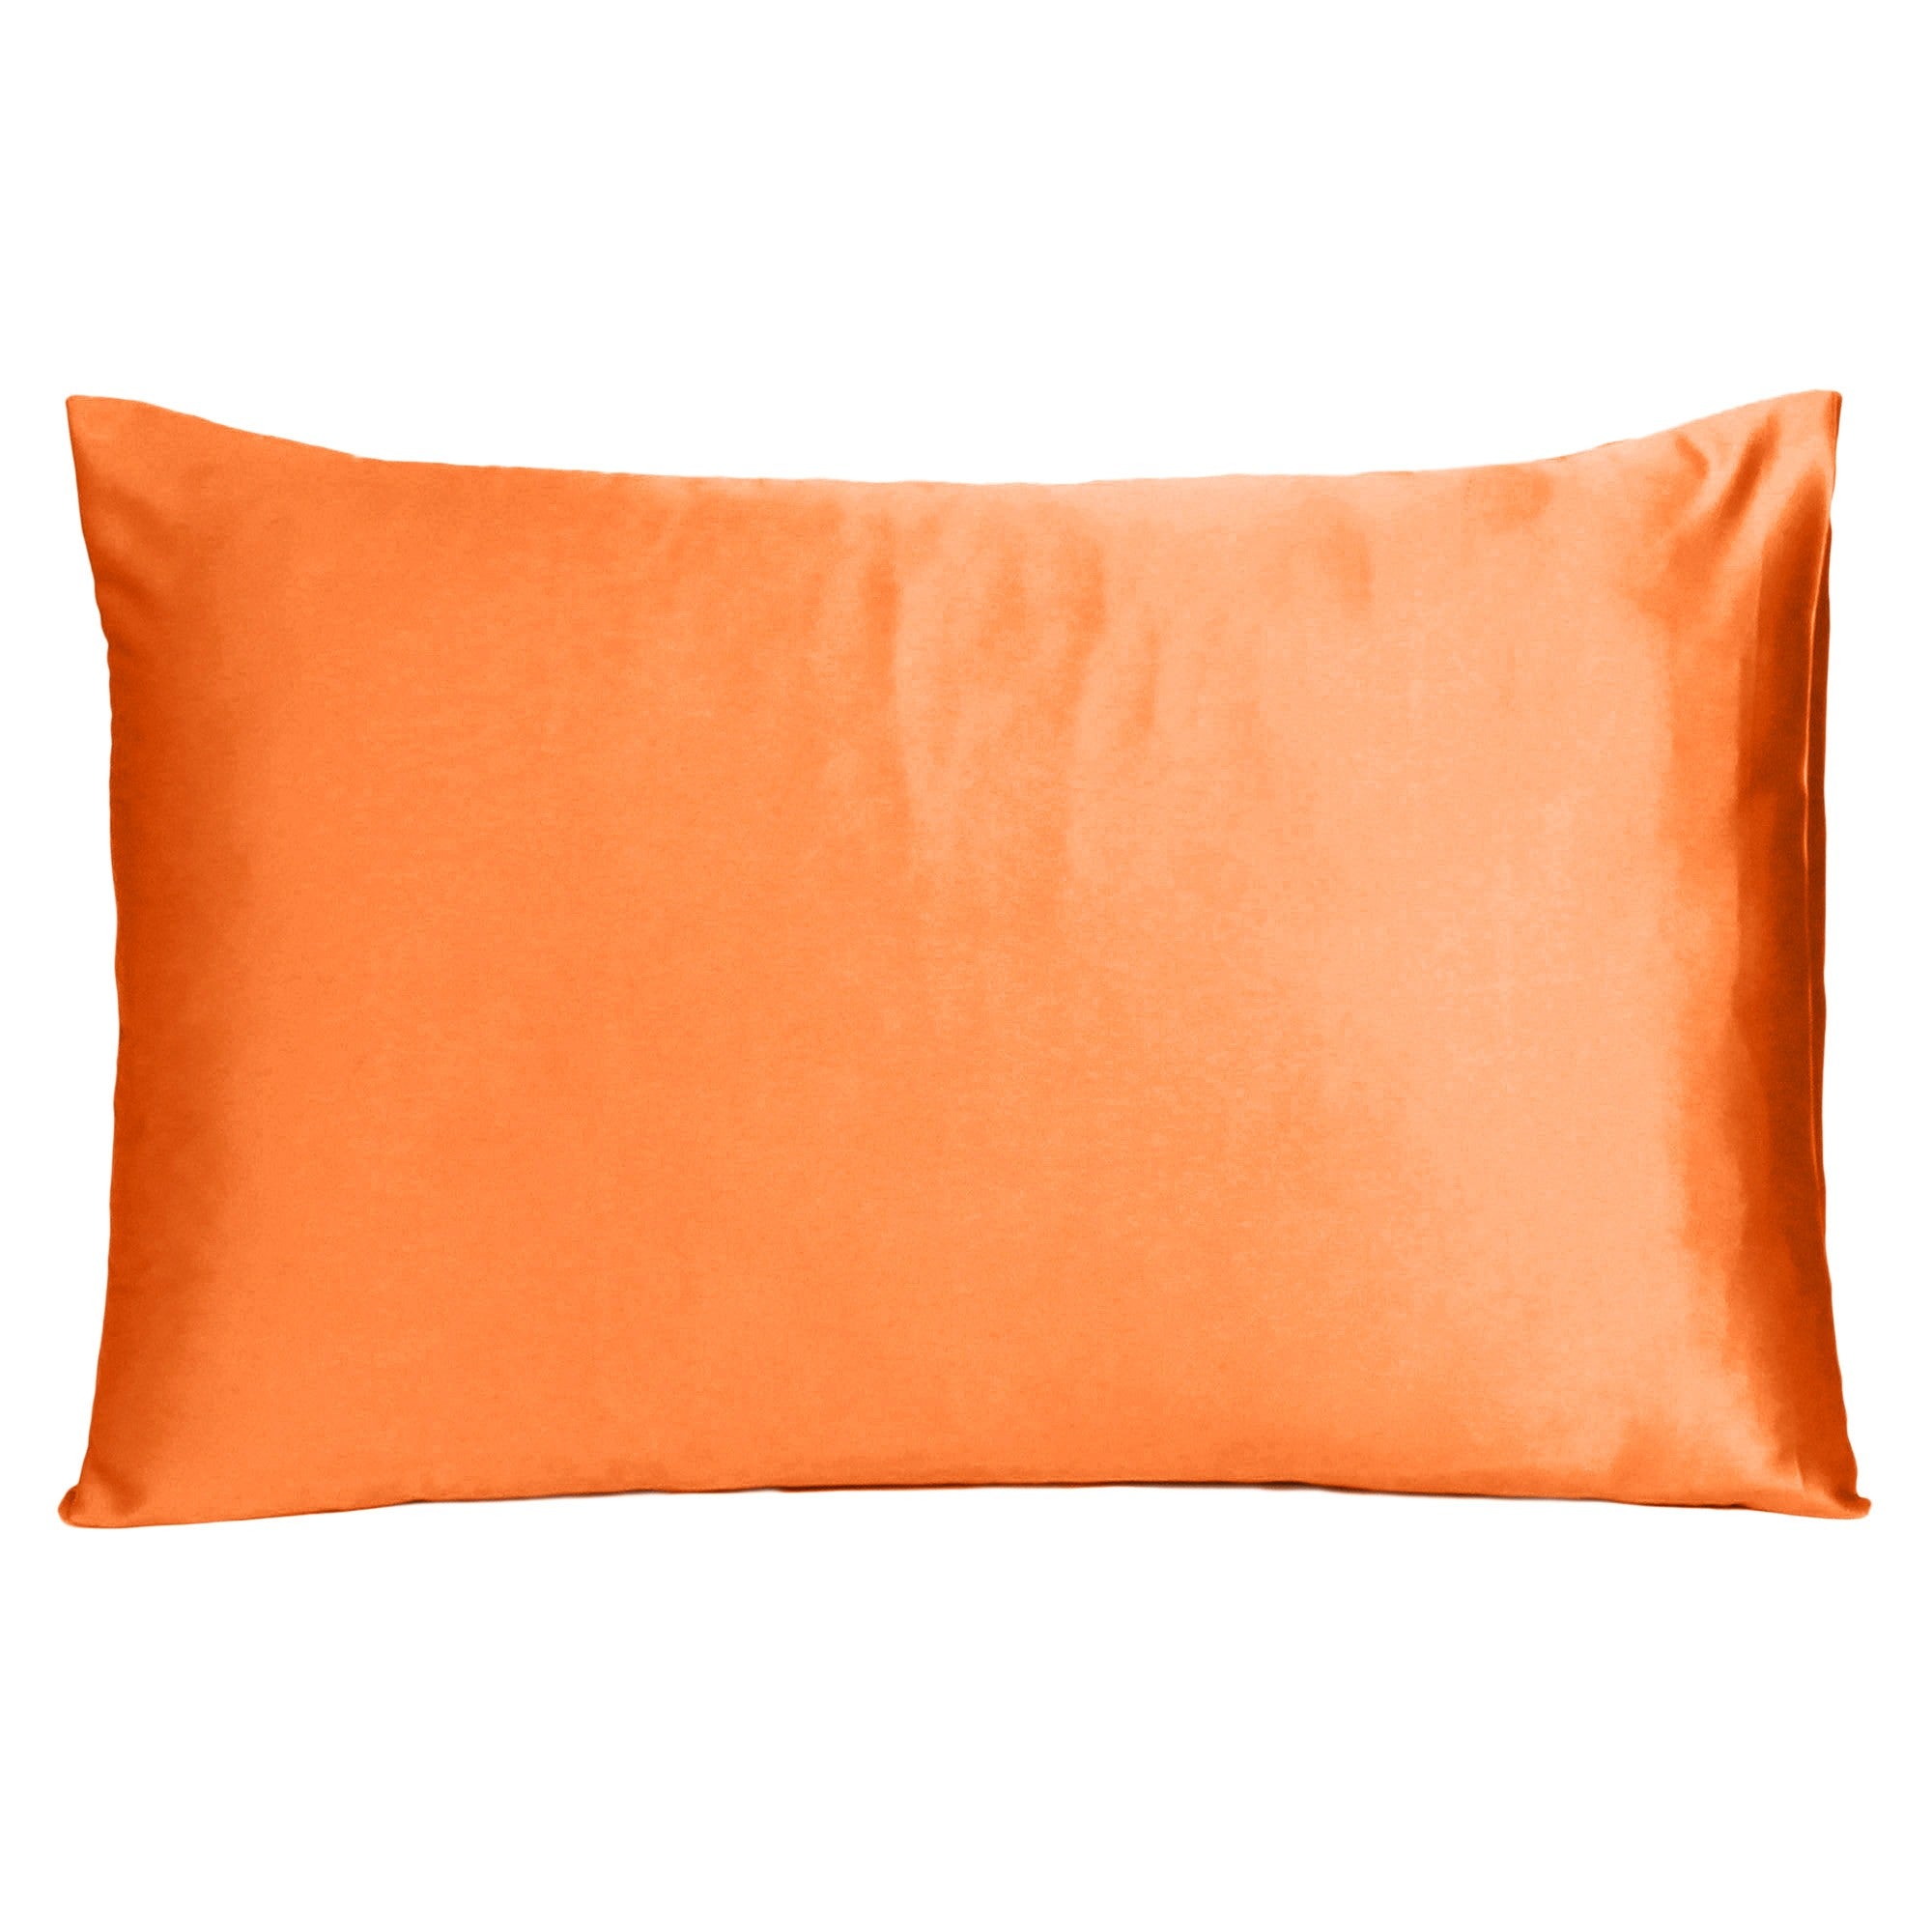 Orange Dreamy Set Of 2 Silky Satin Queen Pillowcases - Tuesday Morning-Bed Sheets